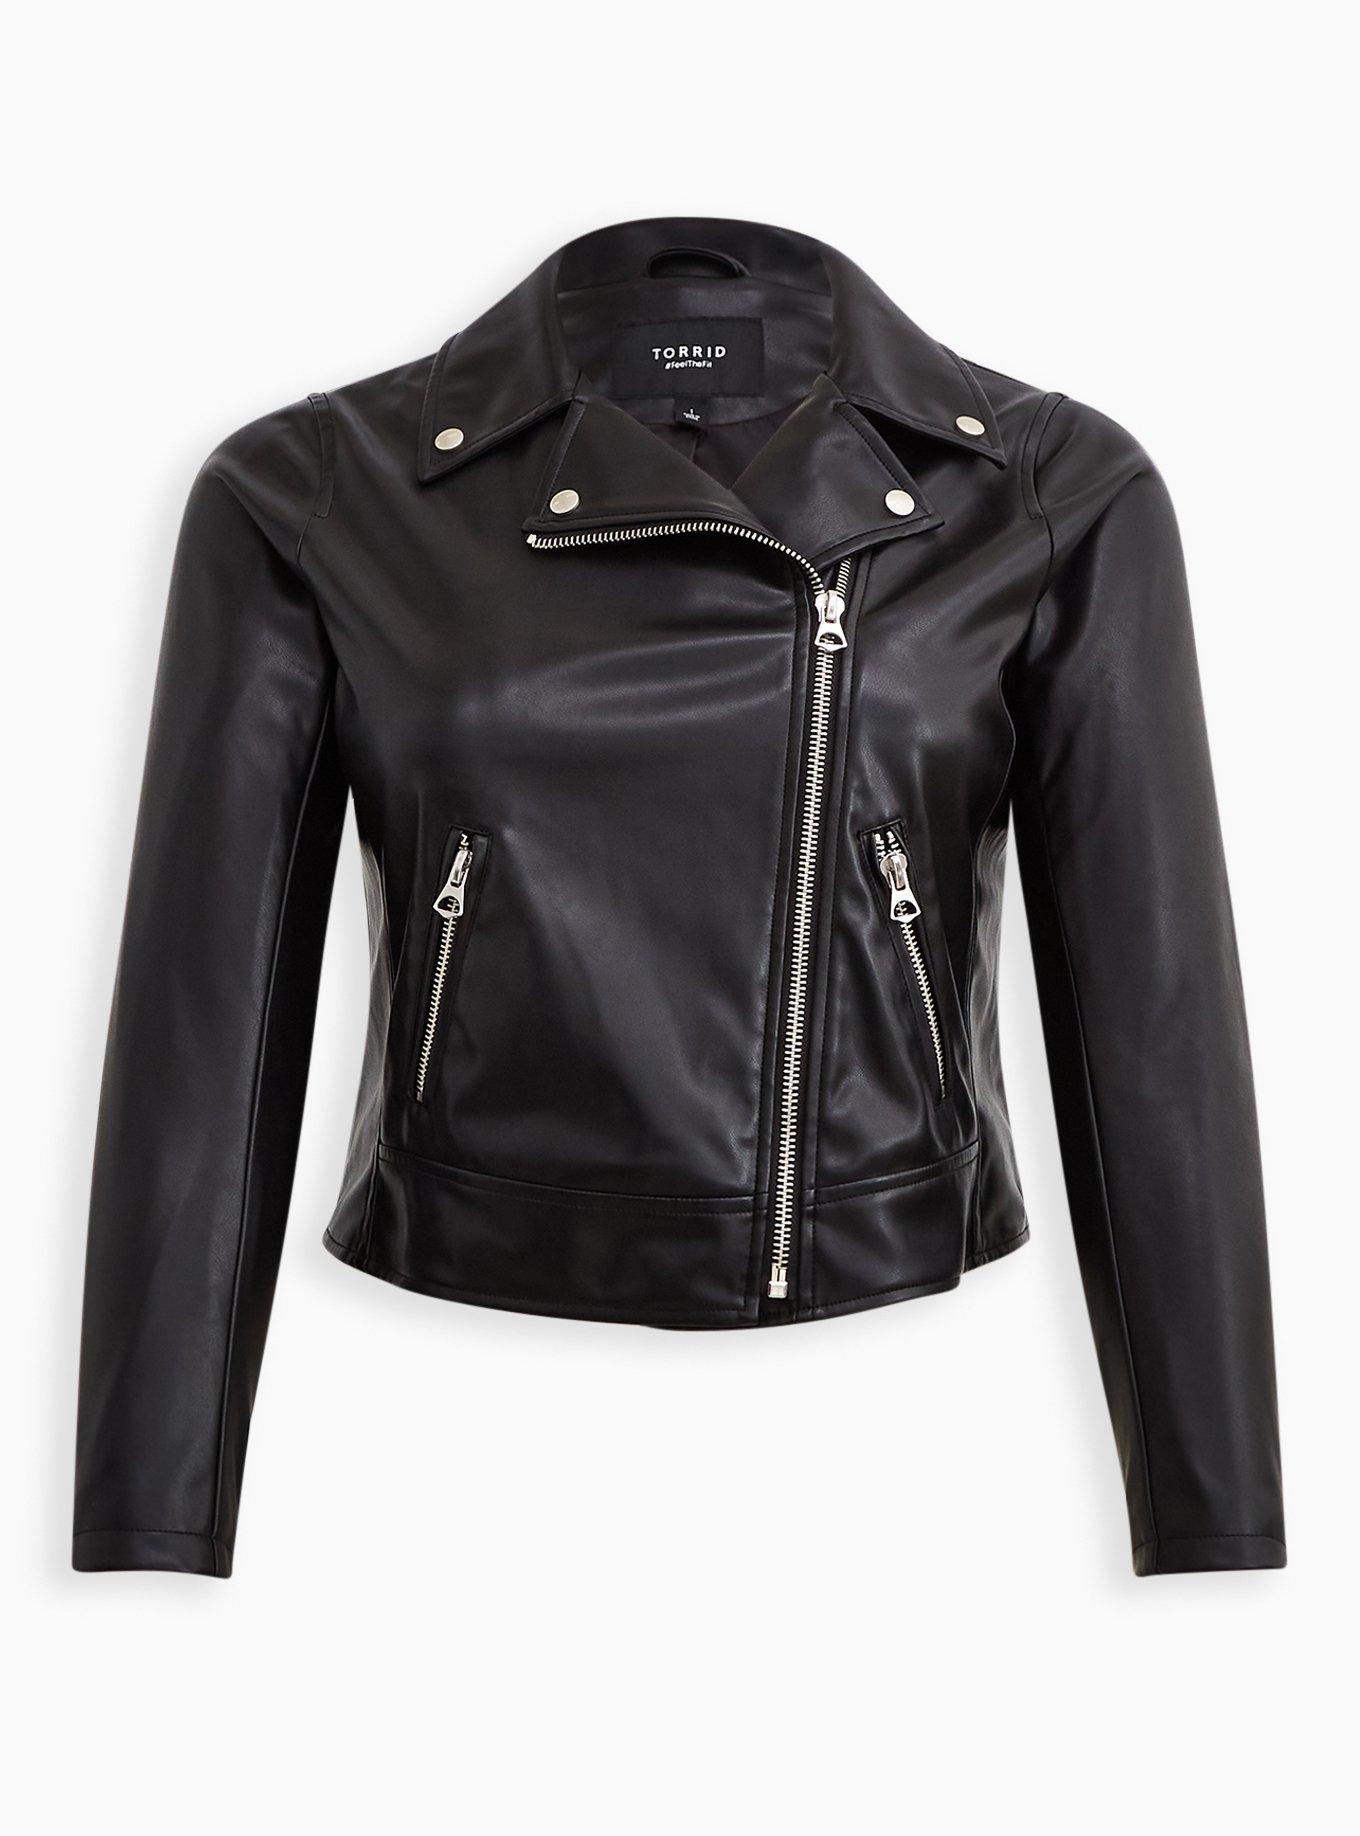 Where to Buy Real Leather Moto Jackets in Plus Size – Curvily